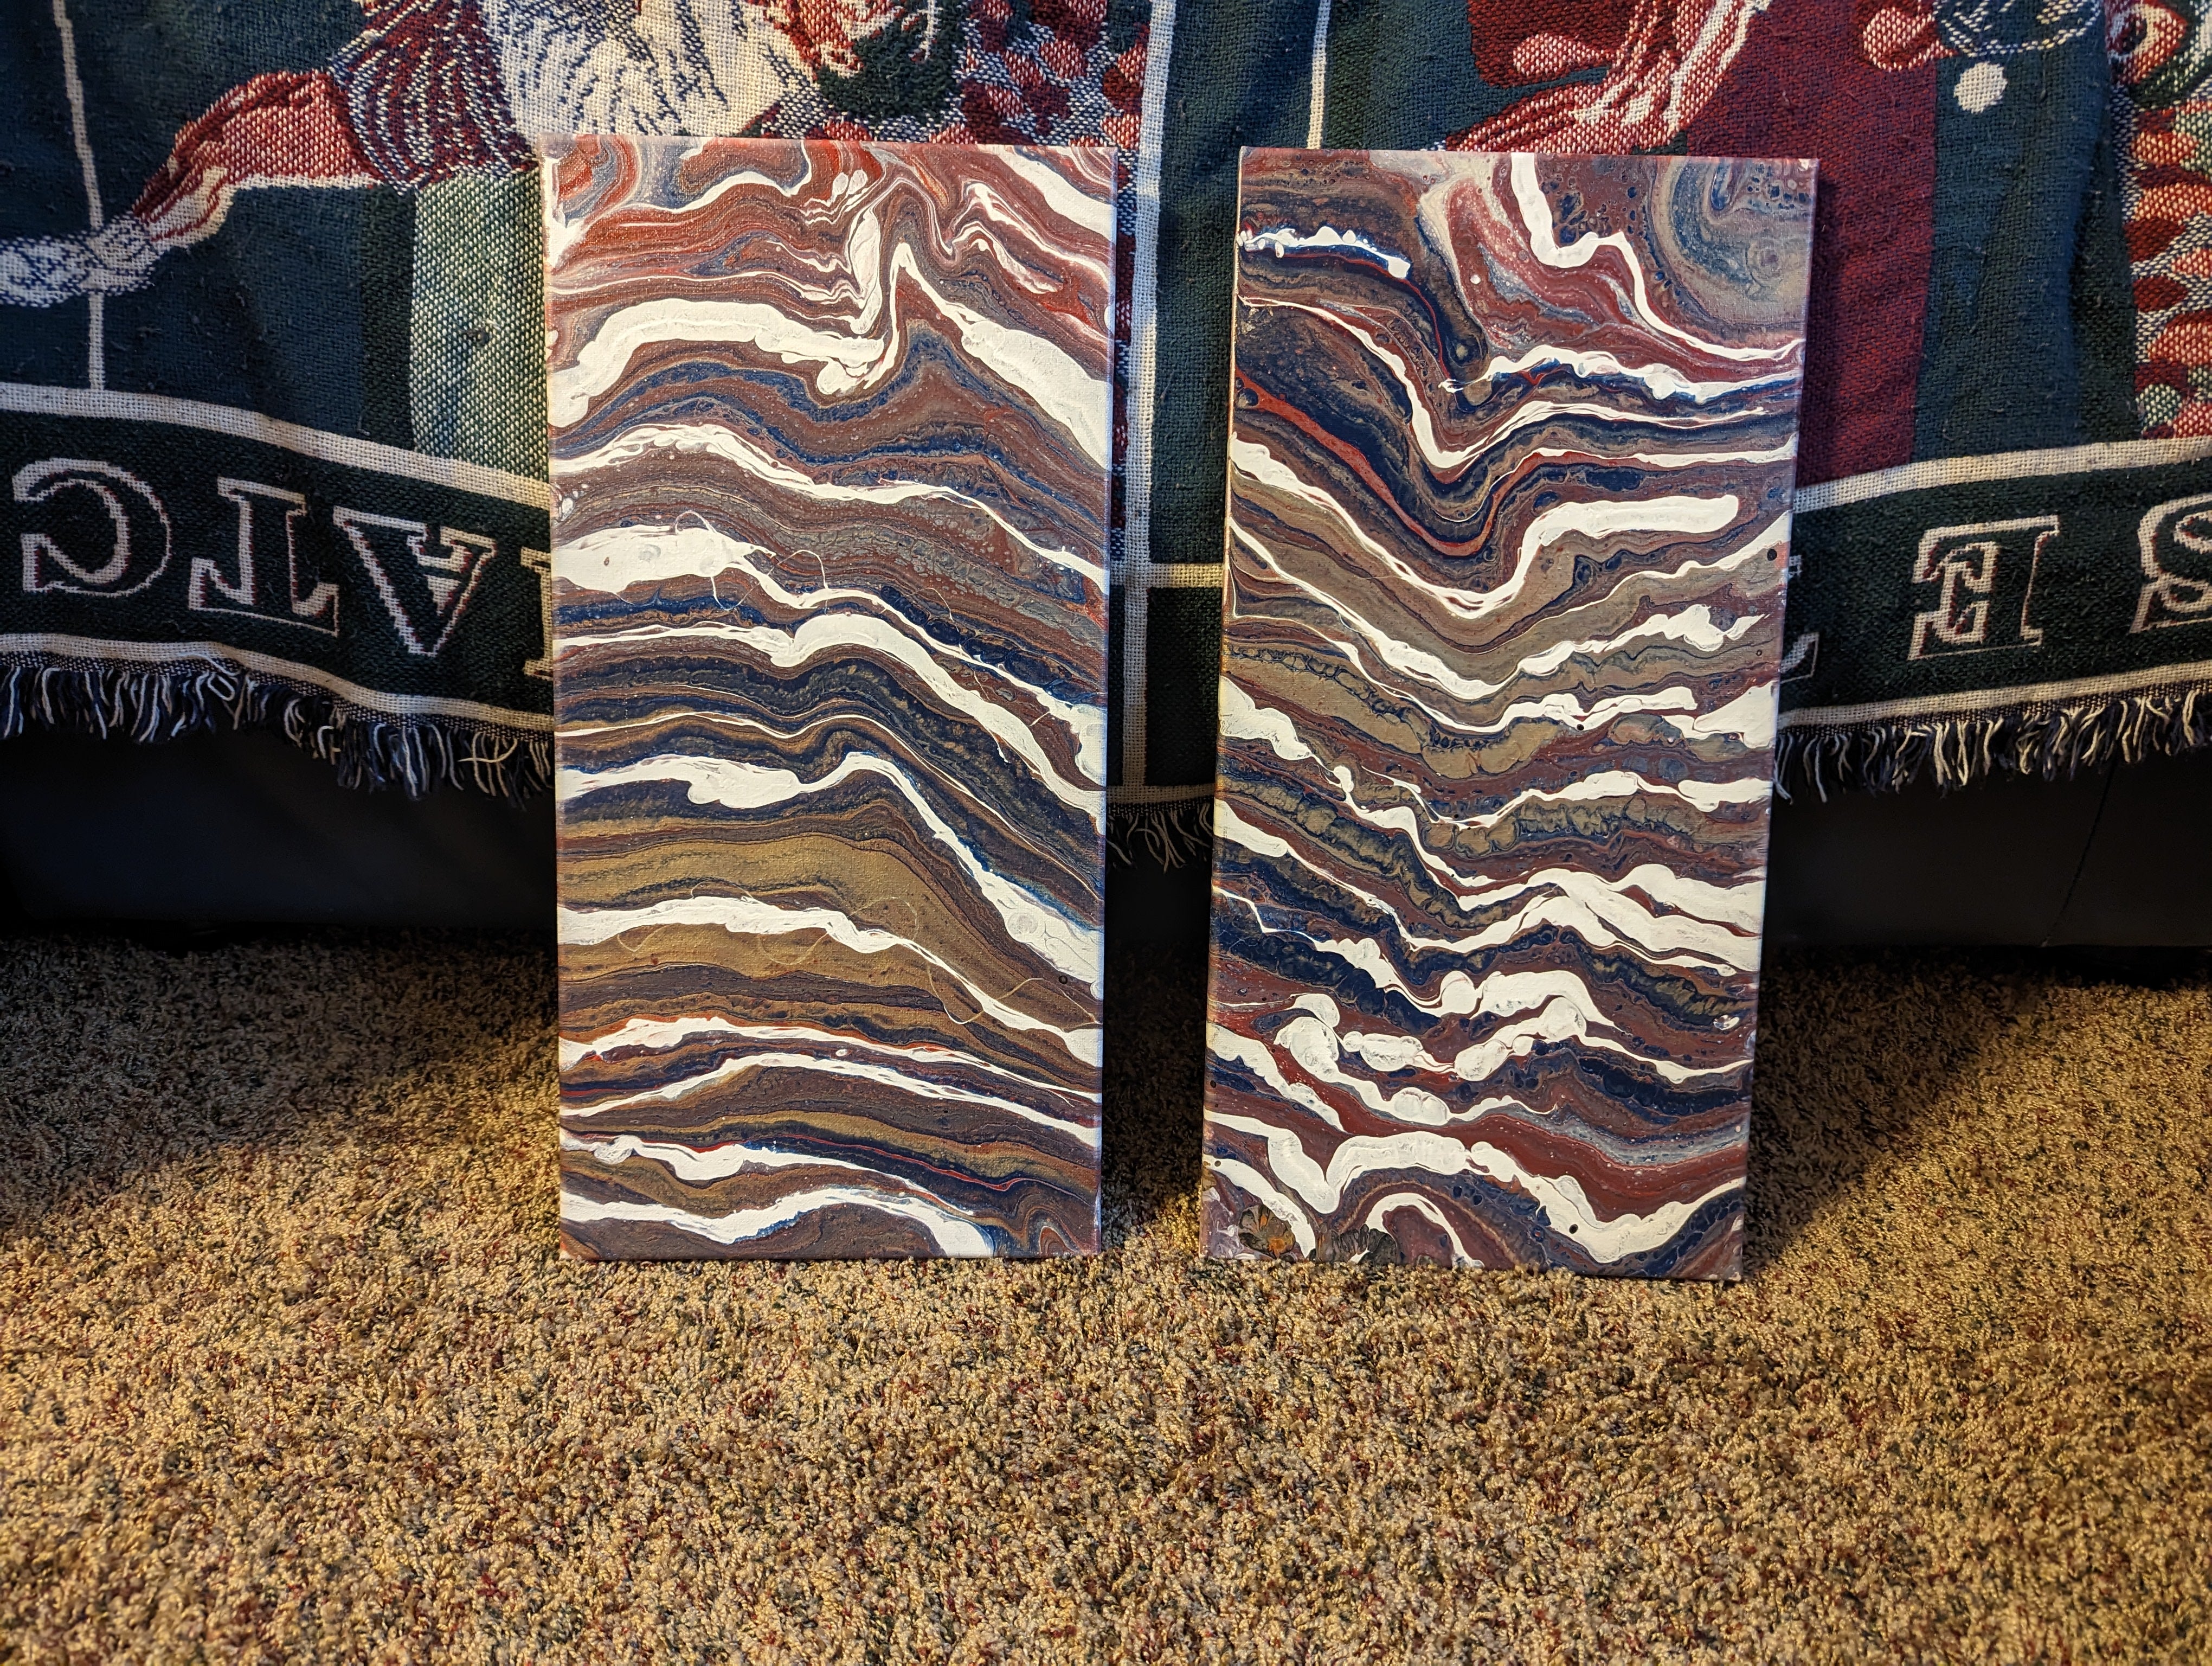 Abstract Paint Pour Painting (10x20") Two Piece Set - "Metallic Mining"